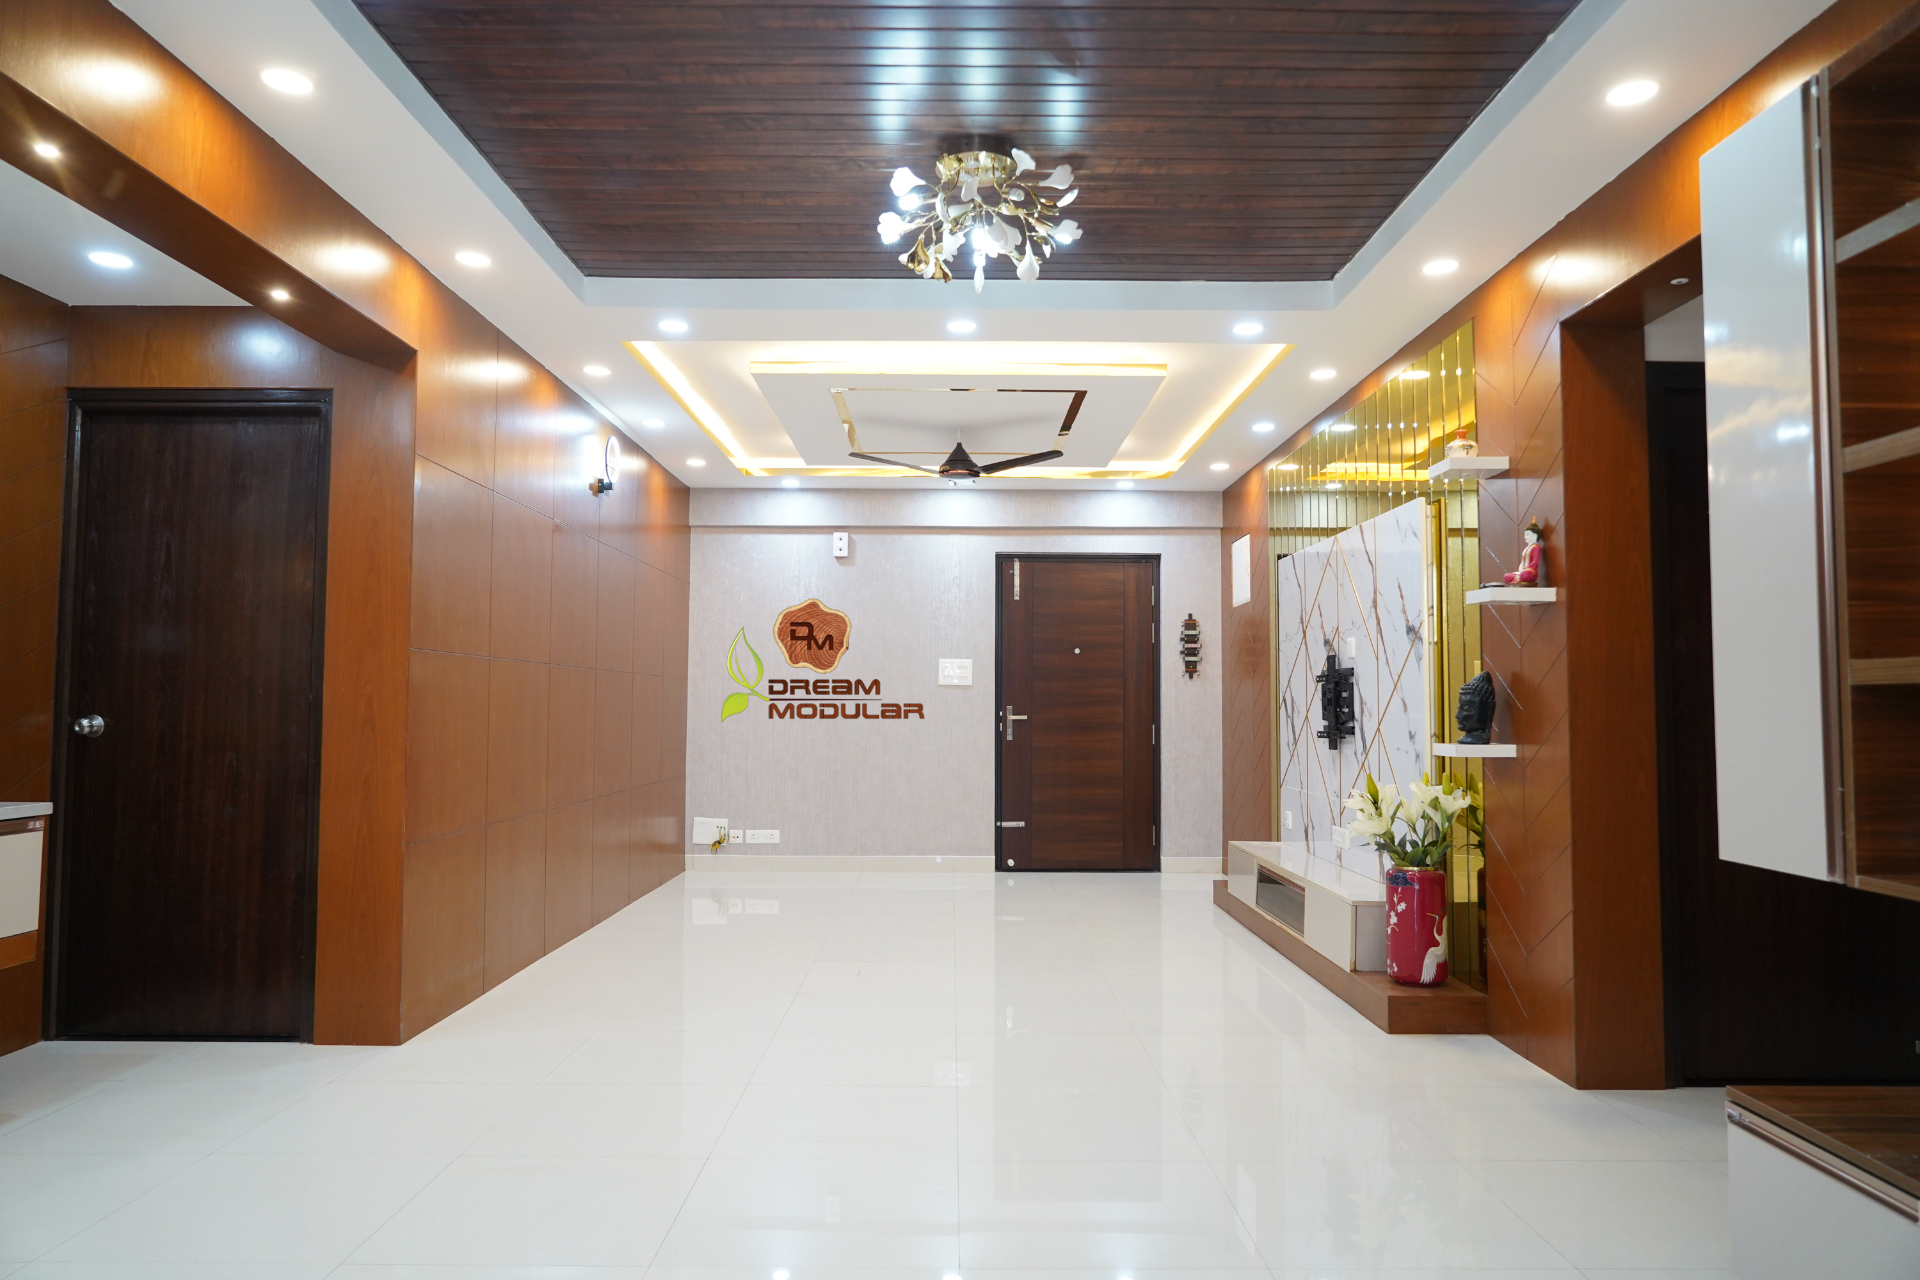 A hallway interior design with a wooden ceiling, Tv Unit with golden stripes and white walls with wooden panels in Hyderabad.